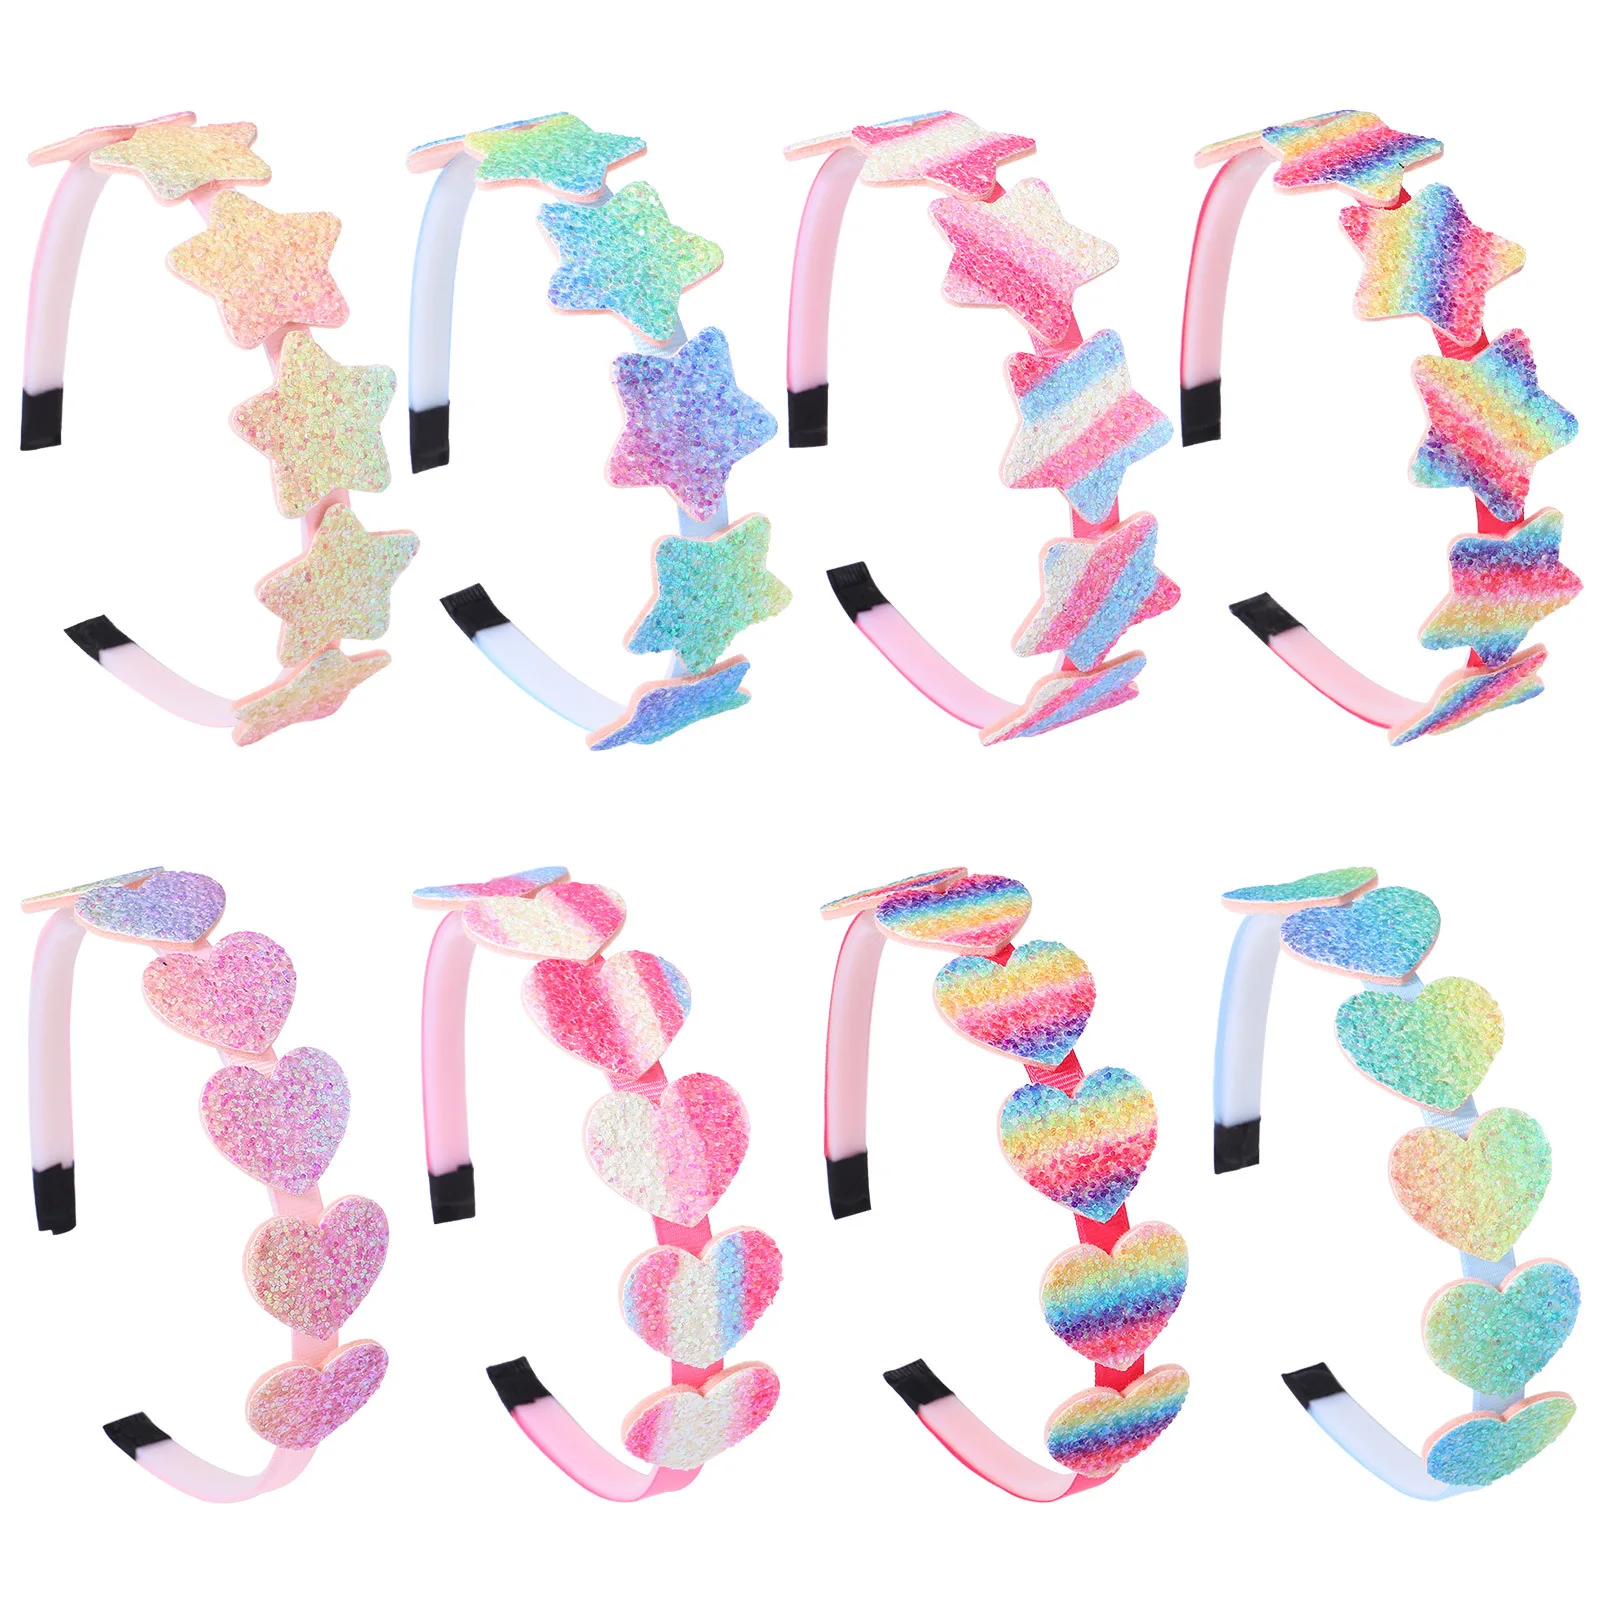 2022 Fashion Girls Glitter Hair Bands Cute Colors Hair Hoop Hairbands Lovely Bow Stars Headbands for Kids Gifts Hair Accessories baby accessories diy